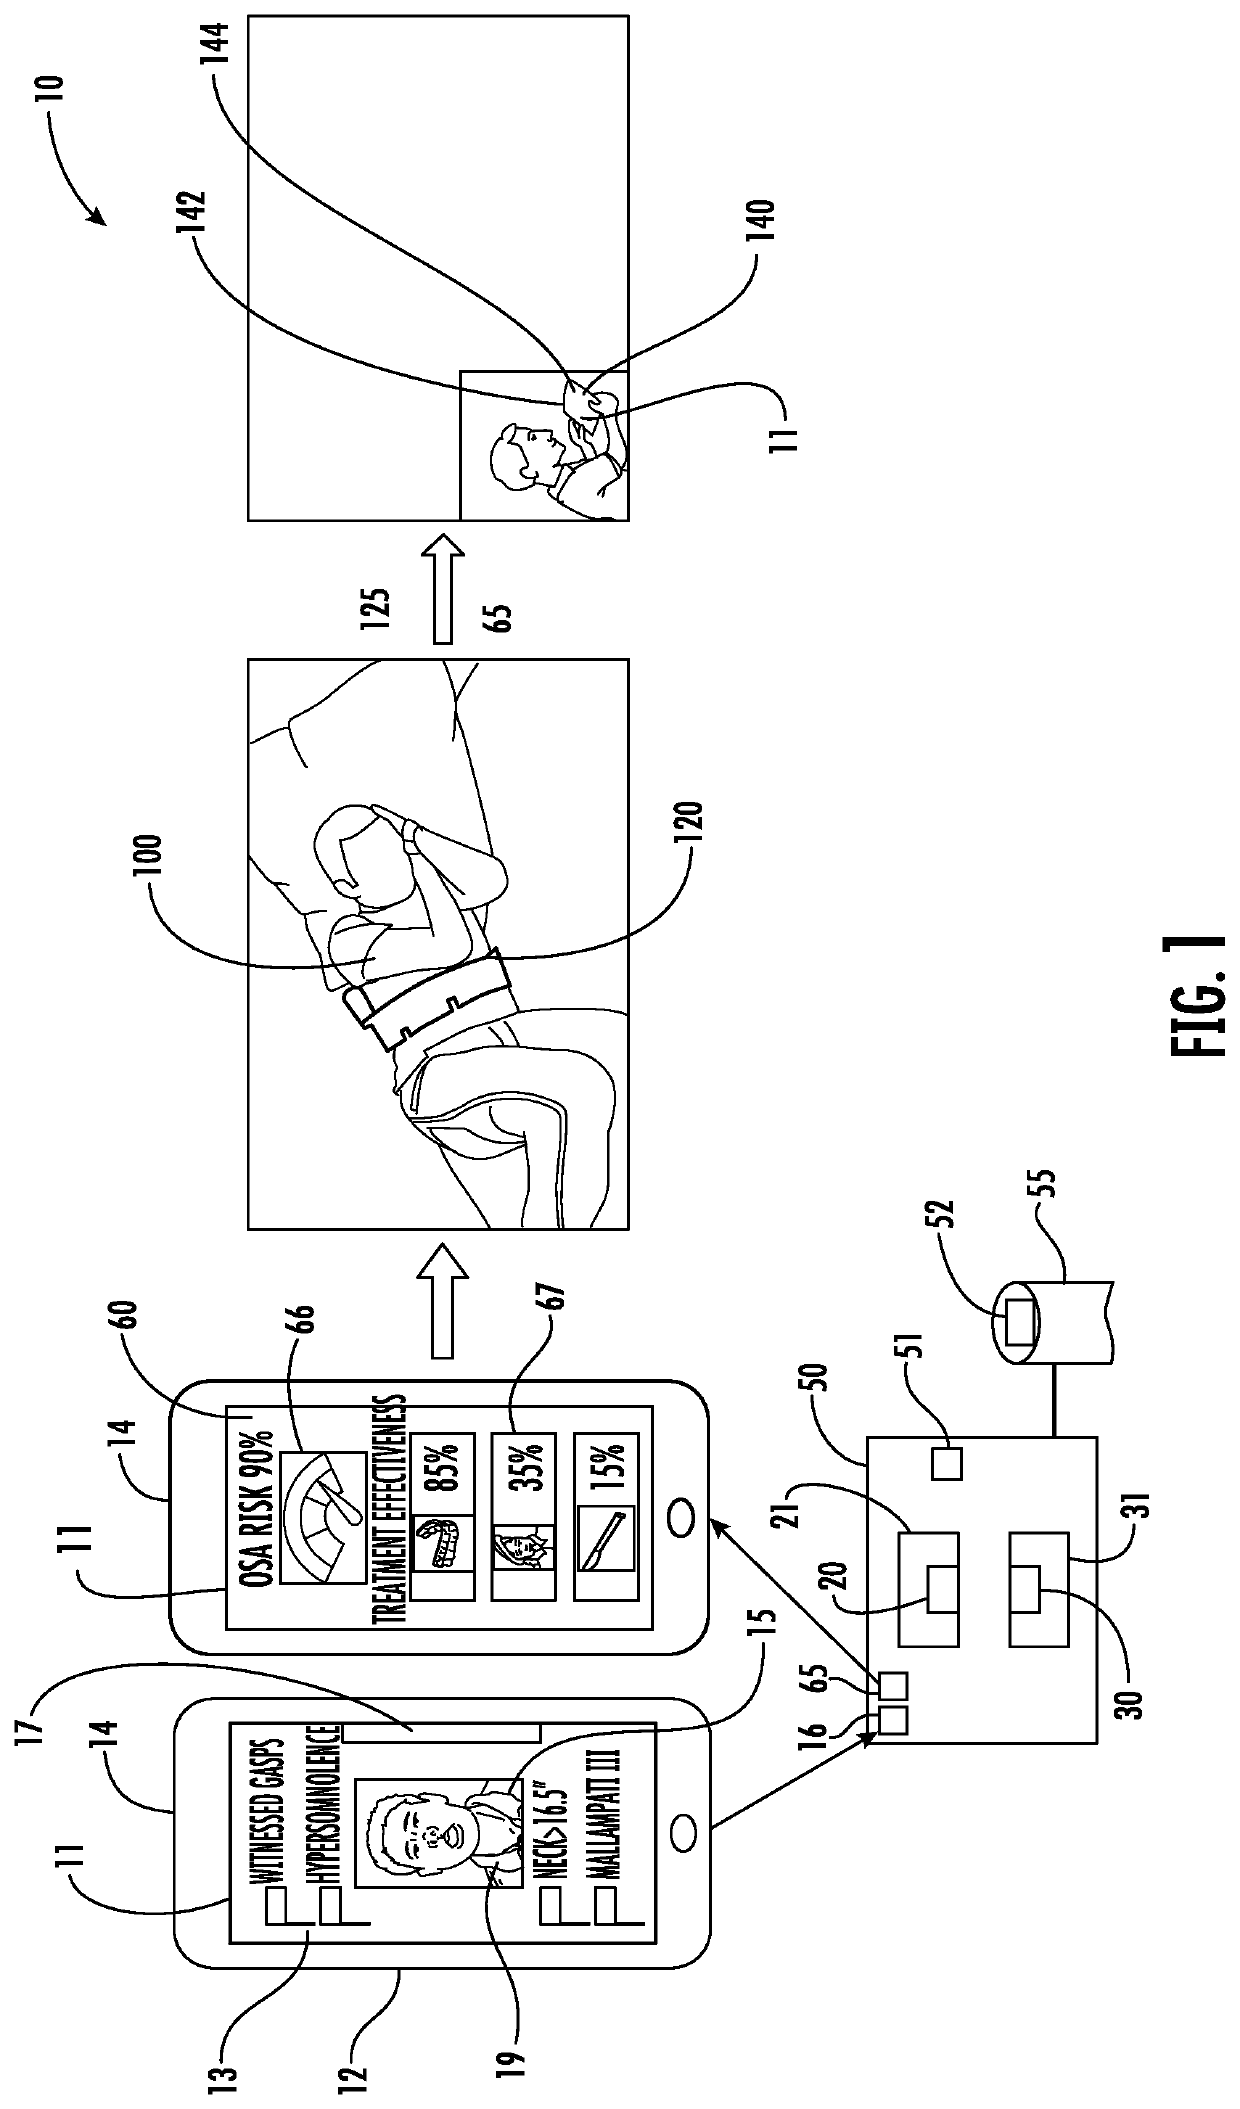 Method and system for diagnosis and prediction of treatment effectiveness for sleep apnea